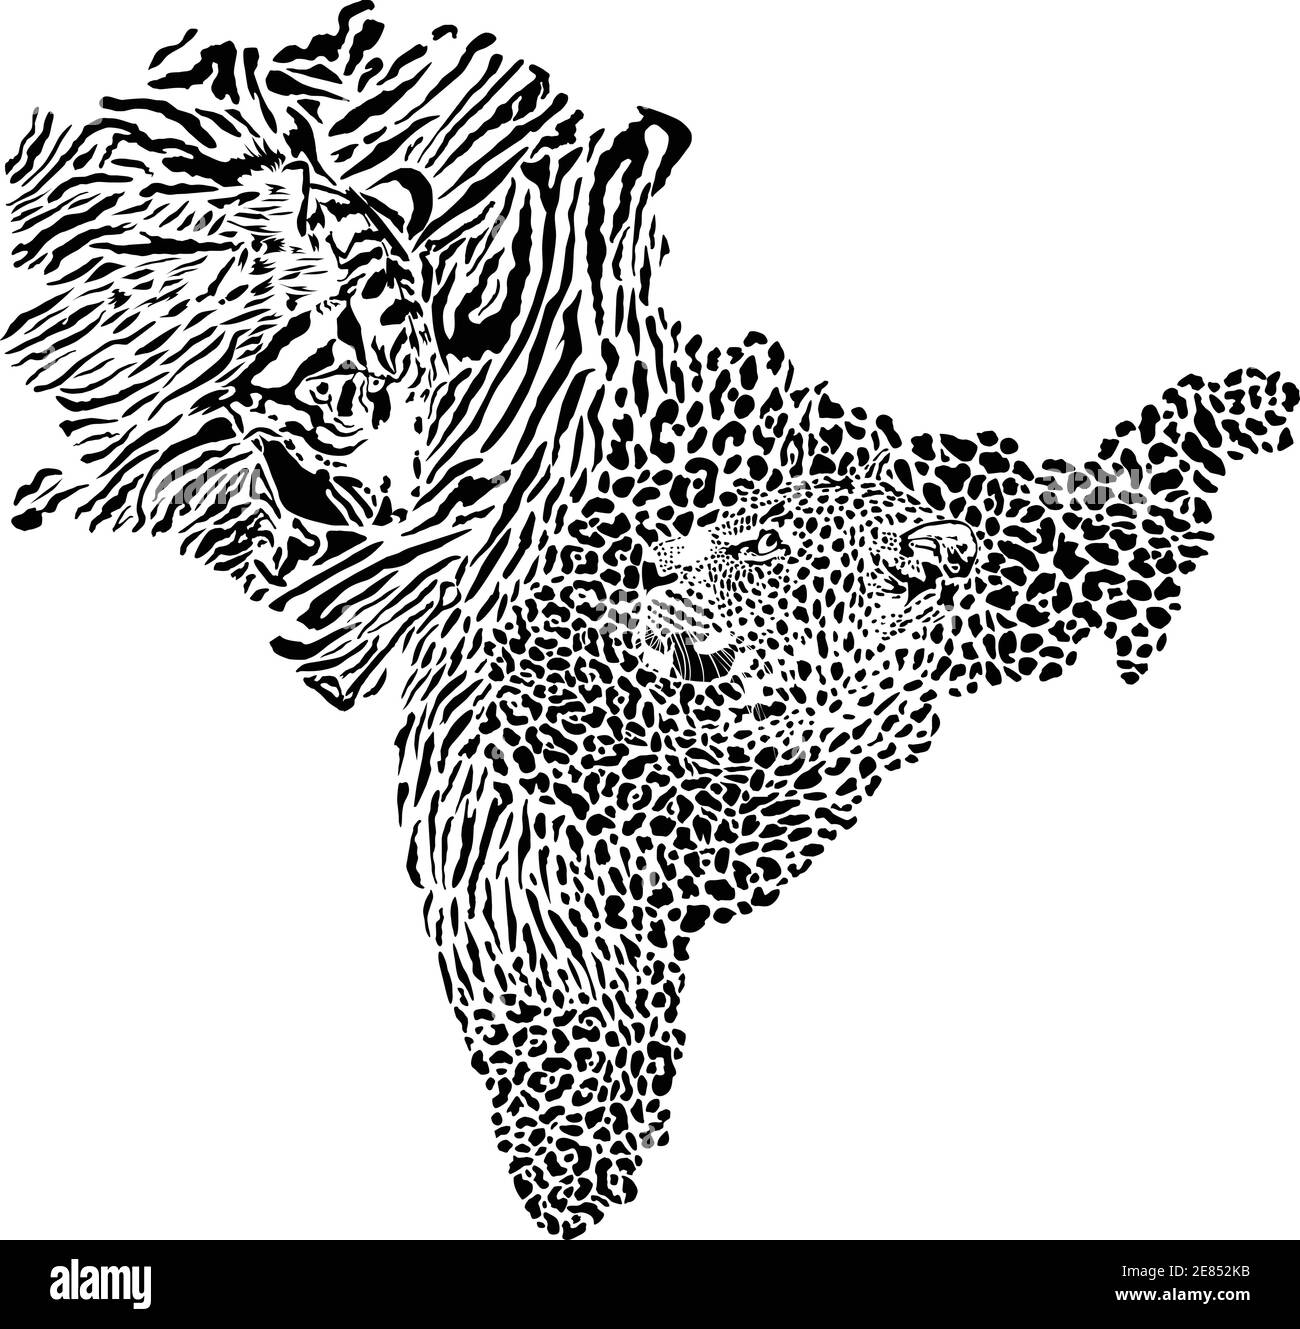 Map of Indian subcontinent with tiger and leopard background Stock Vector